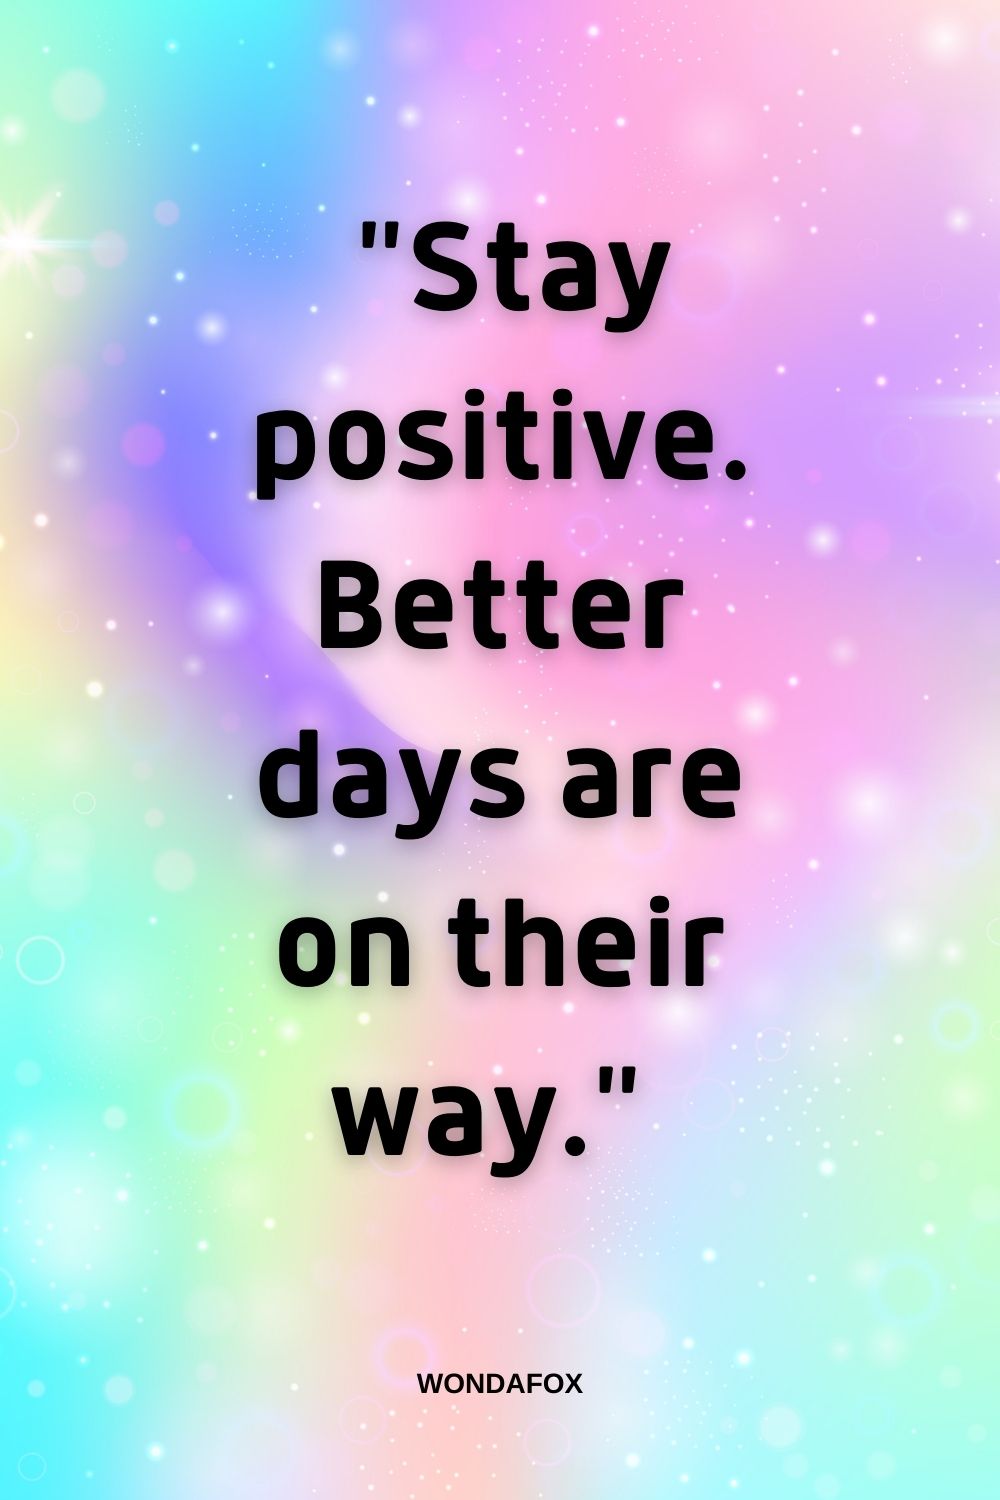  "Stay positive. Better days are on their way." Short Positive Quotes 